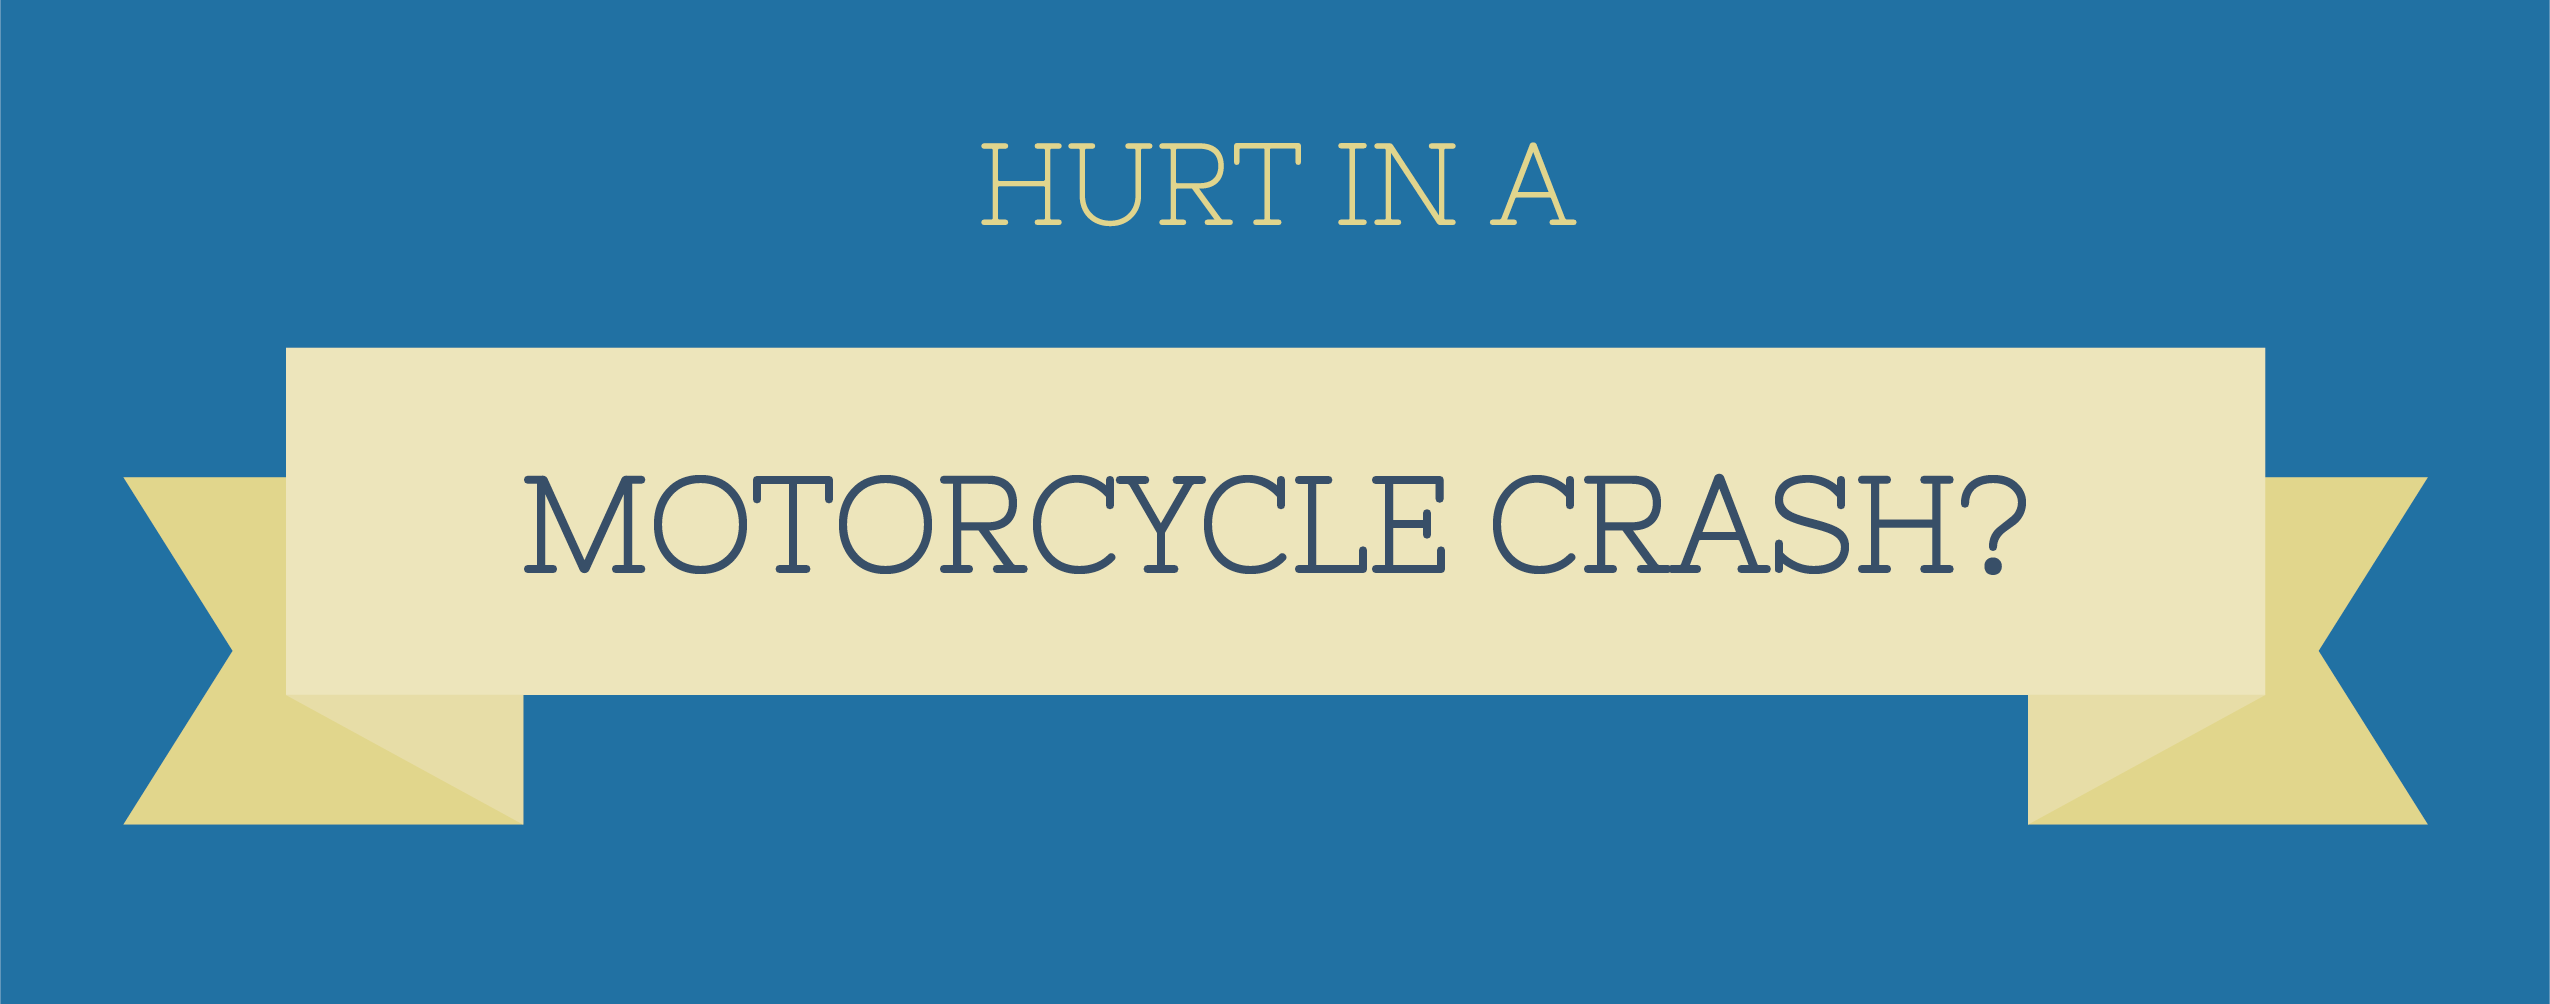 hurt in a motorcycle crash infographic header